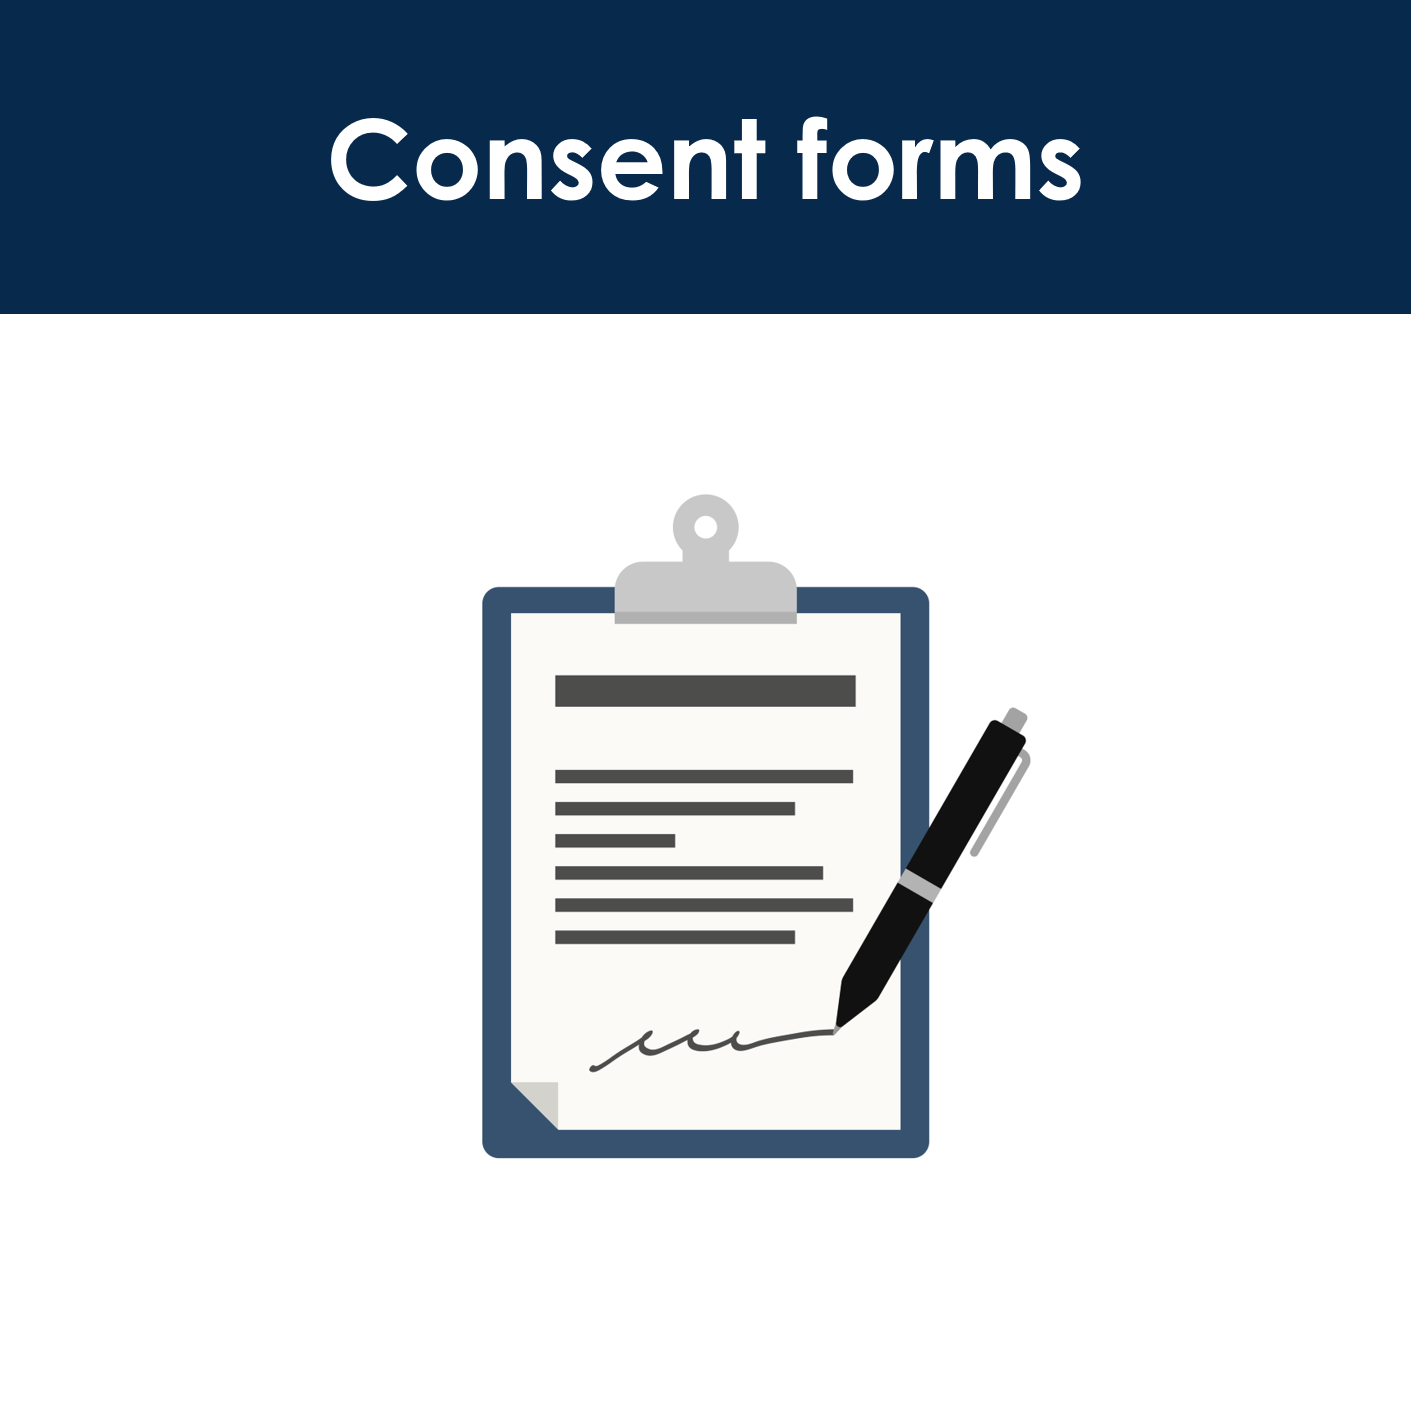 Consent forms